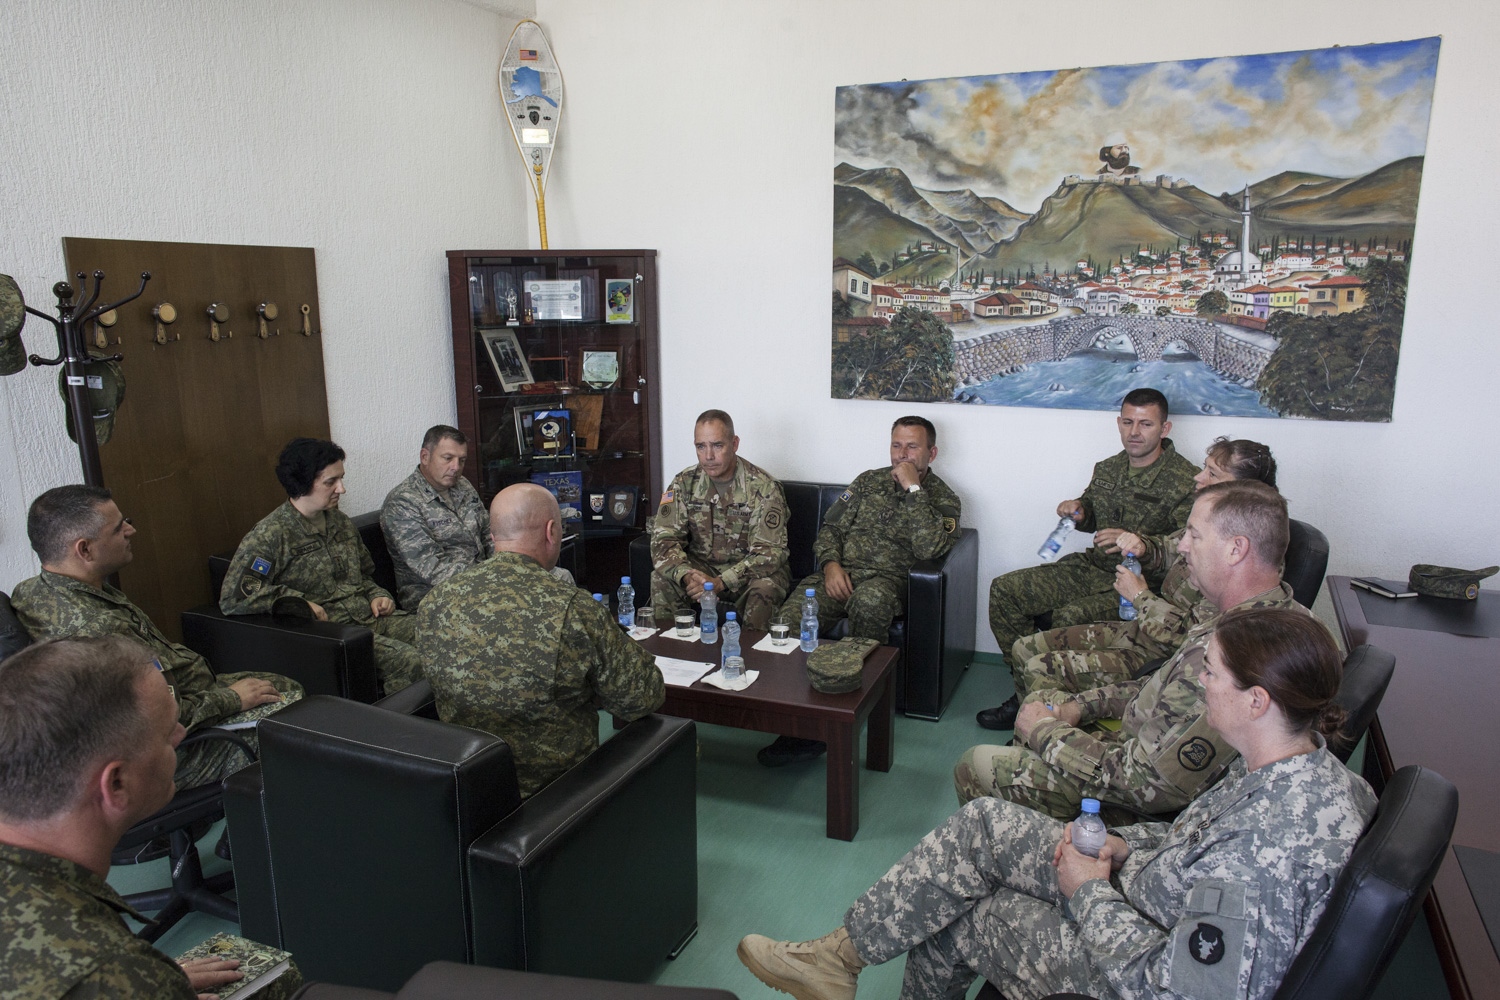 Timothy Orr, Major General from the American National Guard of Iowa, and Rrahman Rama, Commander of the Kosovo Security Force (KSF), during their annual meeting in the KSF premises of the barracks in Ferizaj, Kosovo. The Iowa military corps provide professional assistance to the KSF, in order to make them ready for the moment in which the KSF can be transformed into an army.